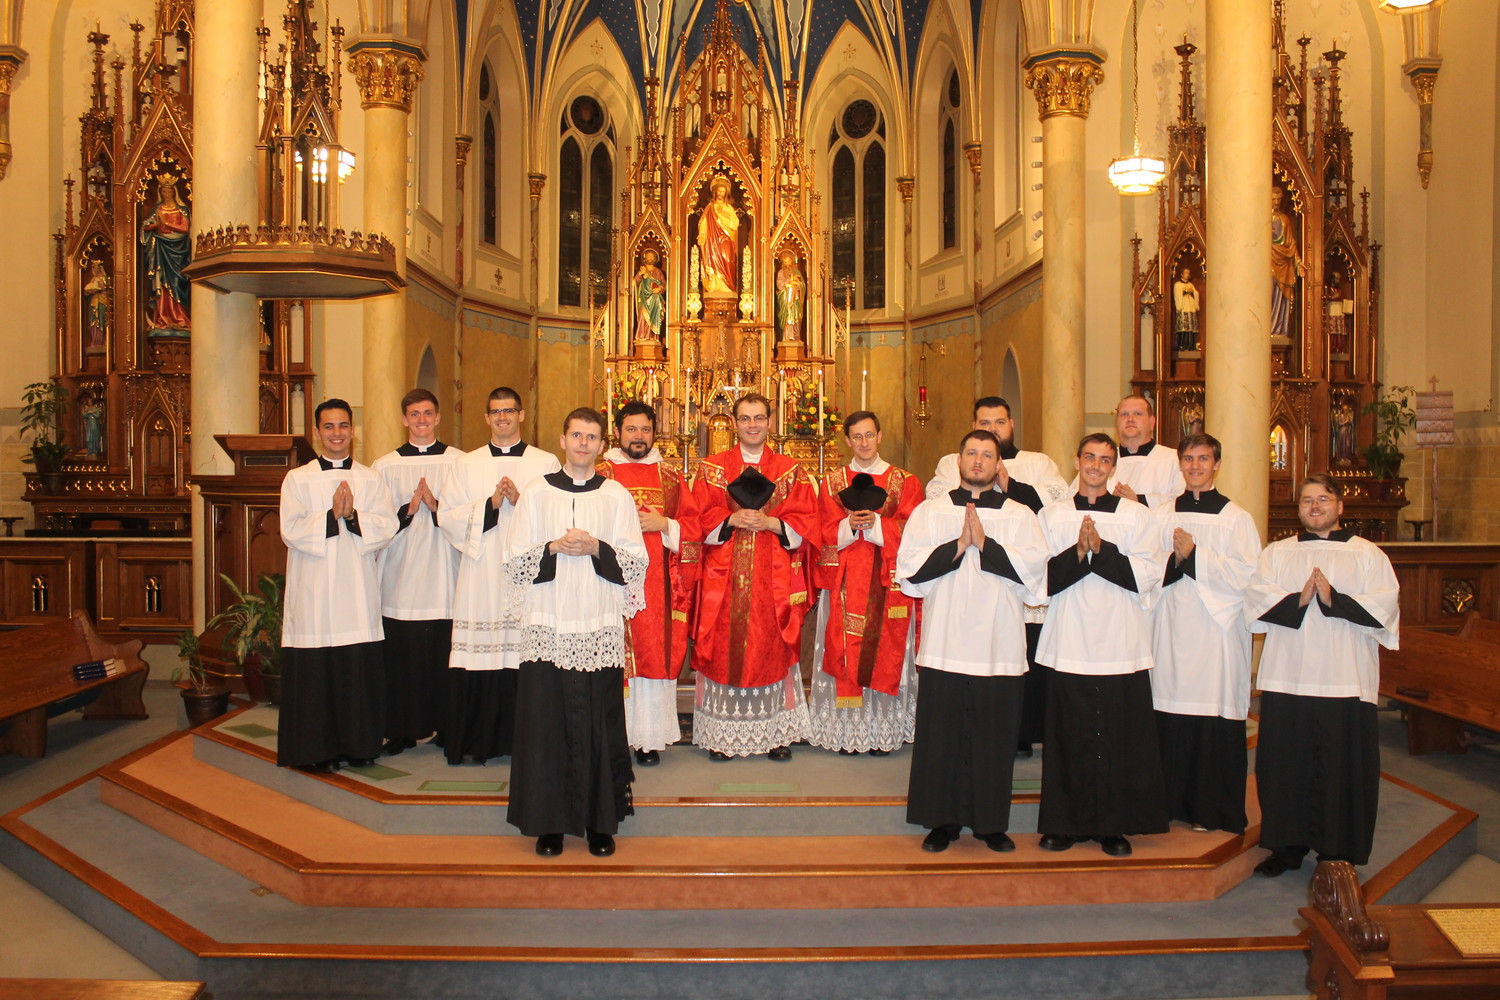 Father Dylan Schrader, center, gathers with the priests and altar servers who assisted him at Mass on Sept. 14 in St. Peter Church in Jefferson City.